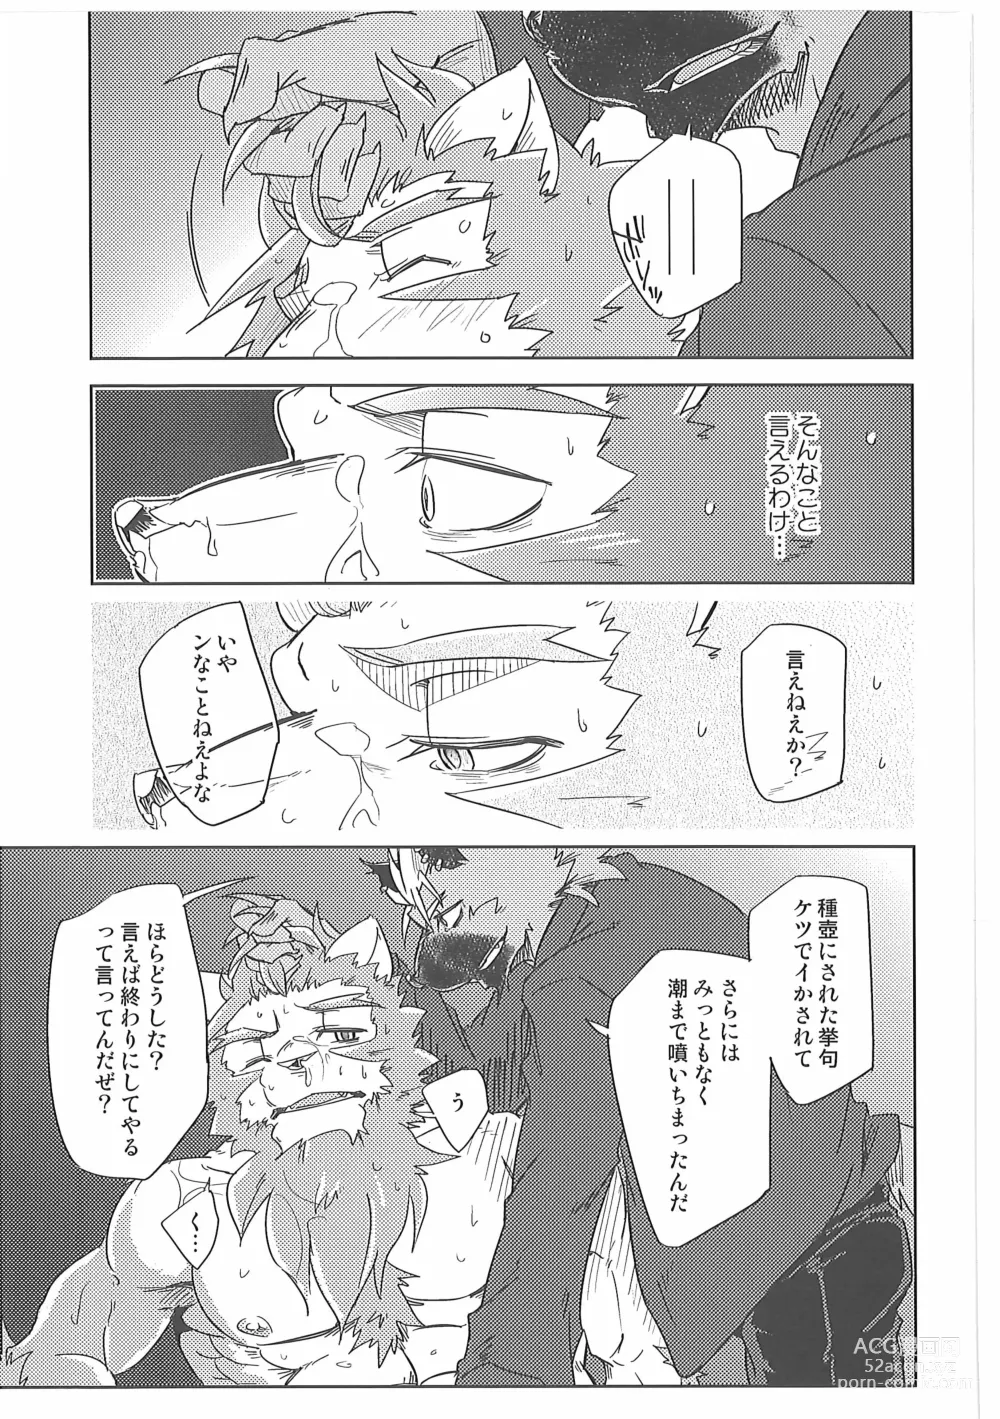 Page 25 of doujinshi Water under The Bridge 2